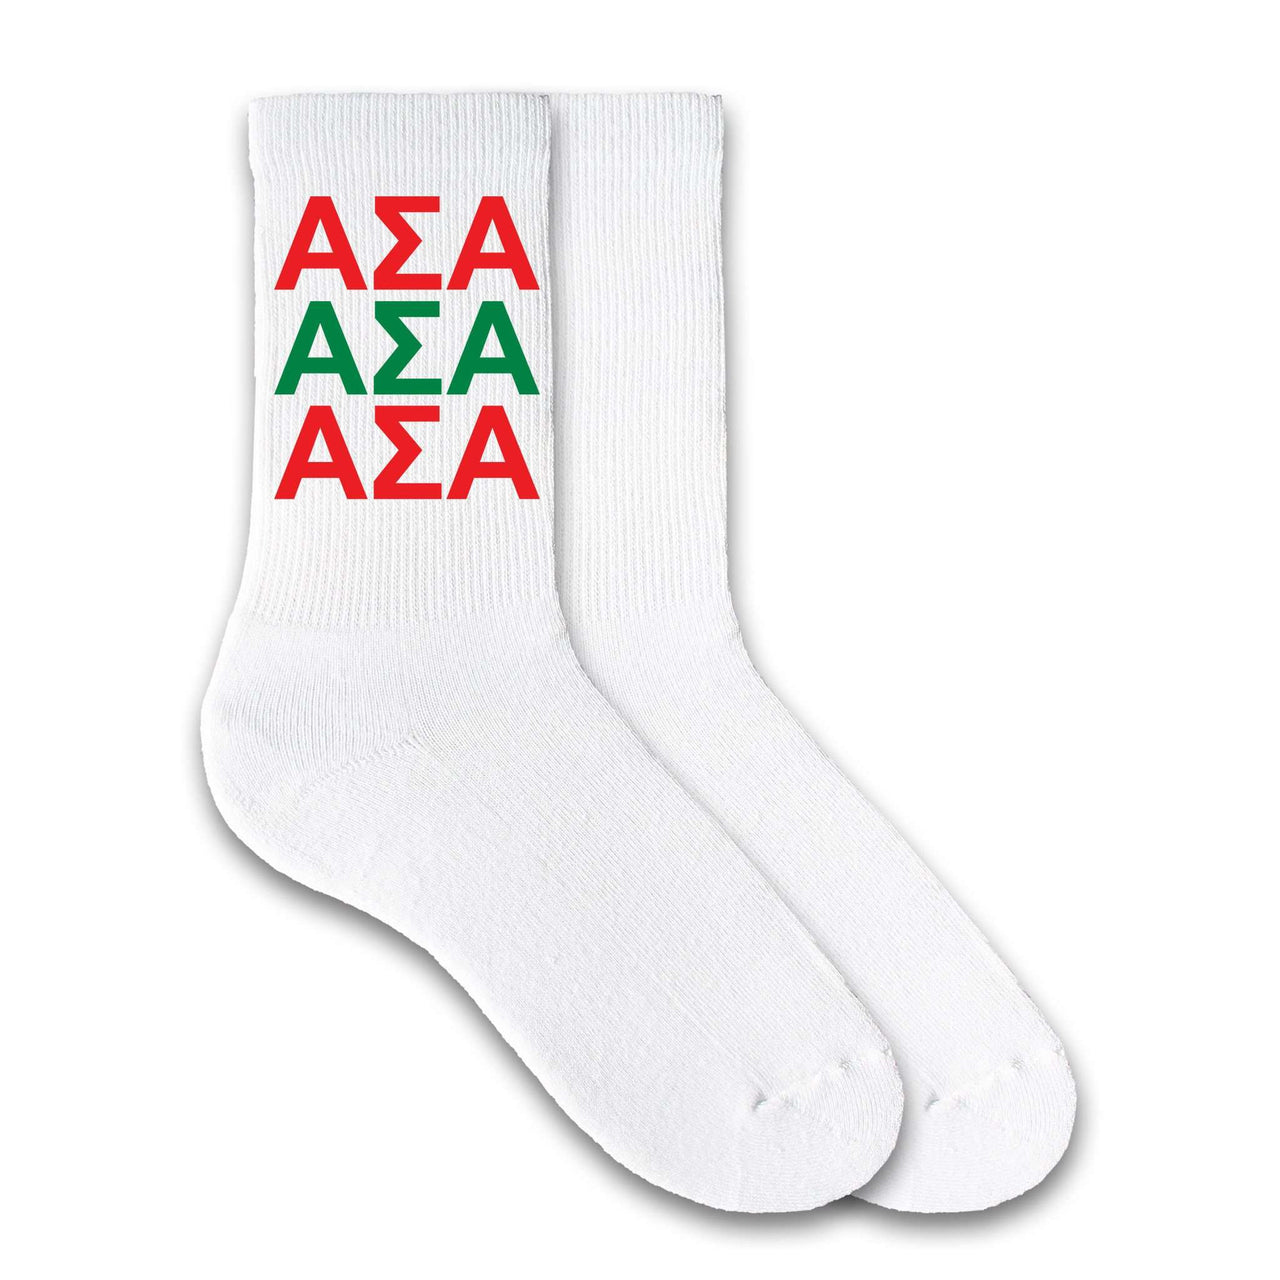 ASA sorority letters custom printed in repeating patters on white cotton crew socks